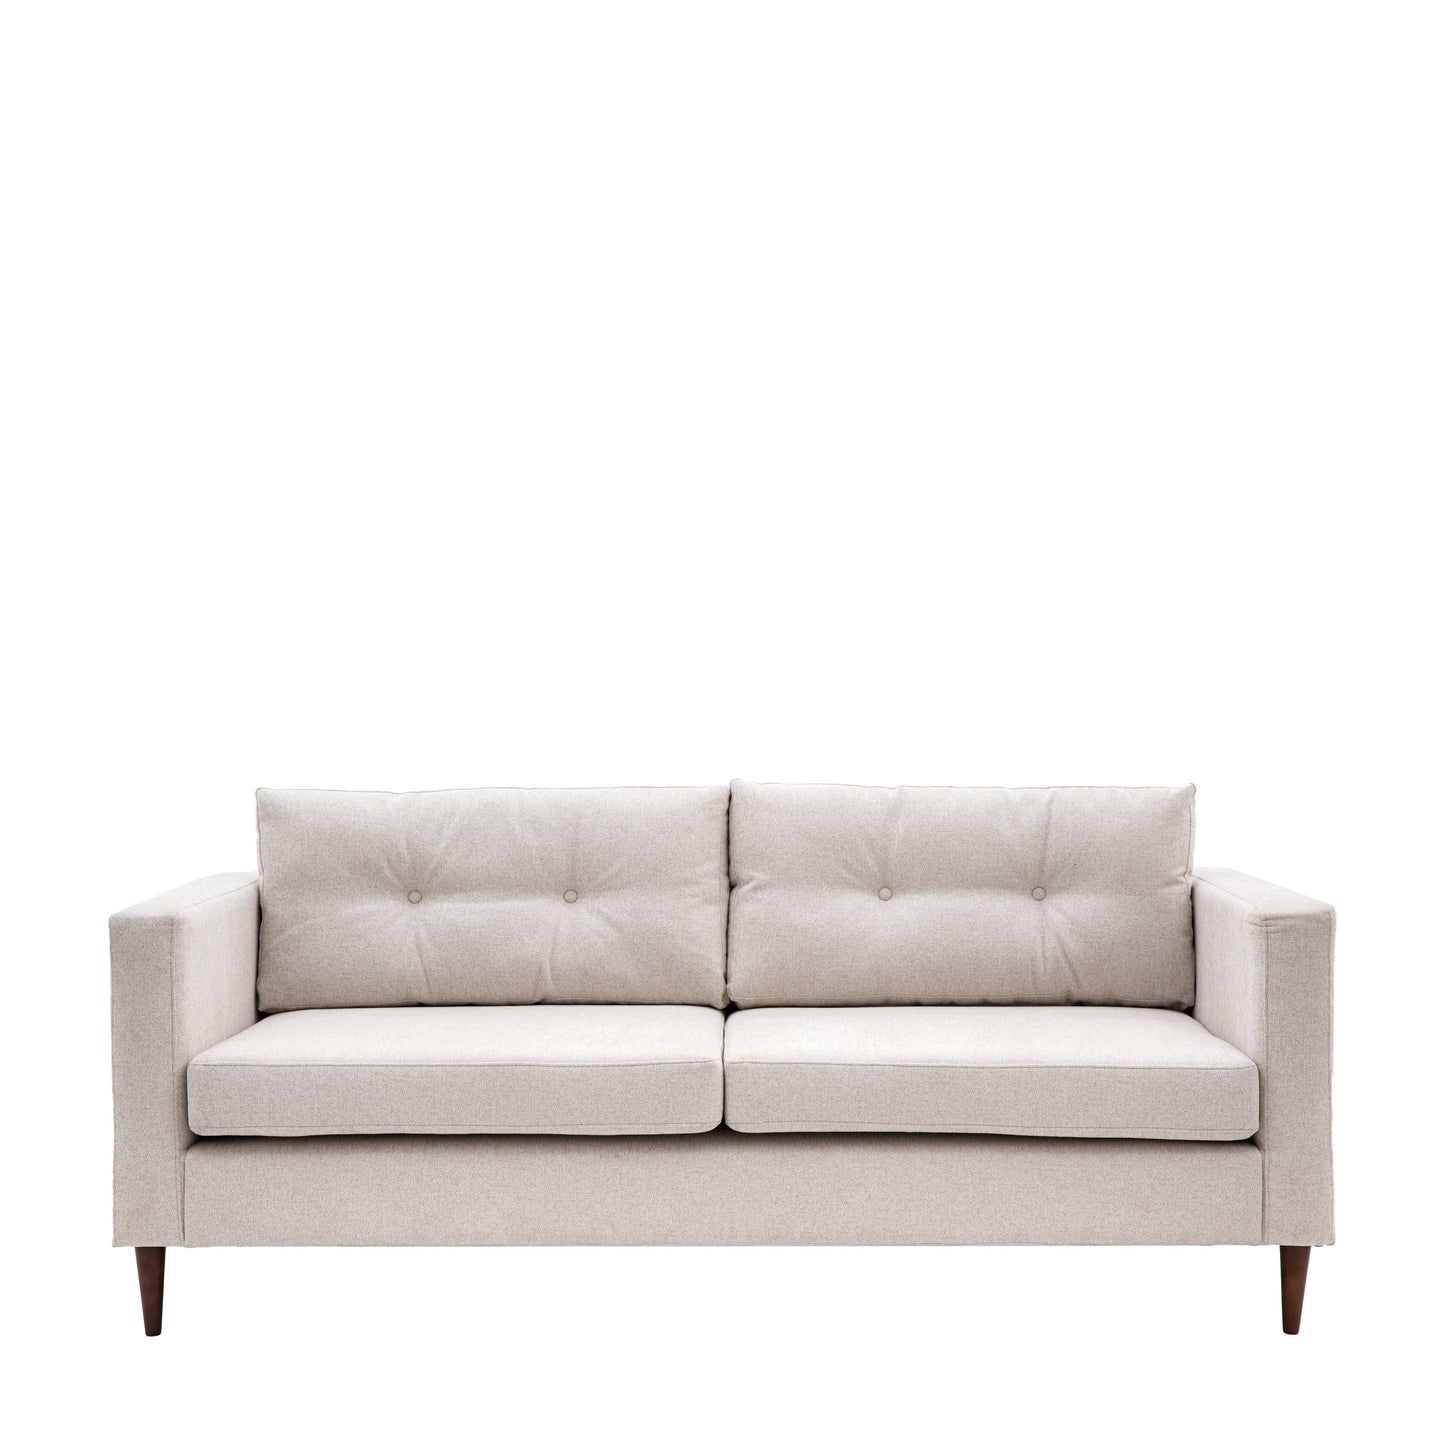 Whitwell Sofa 3 Seater - Colour Options